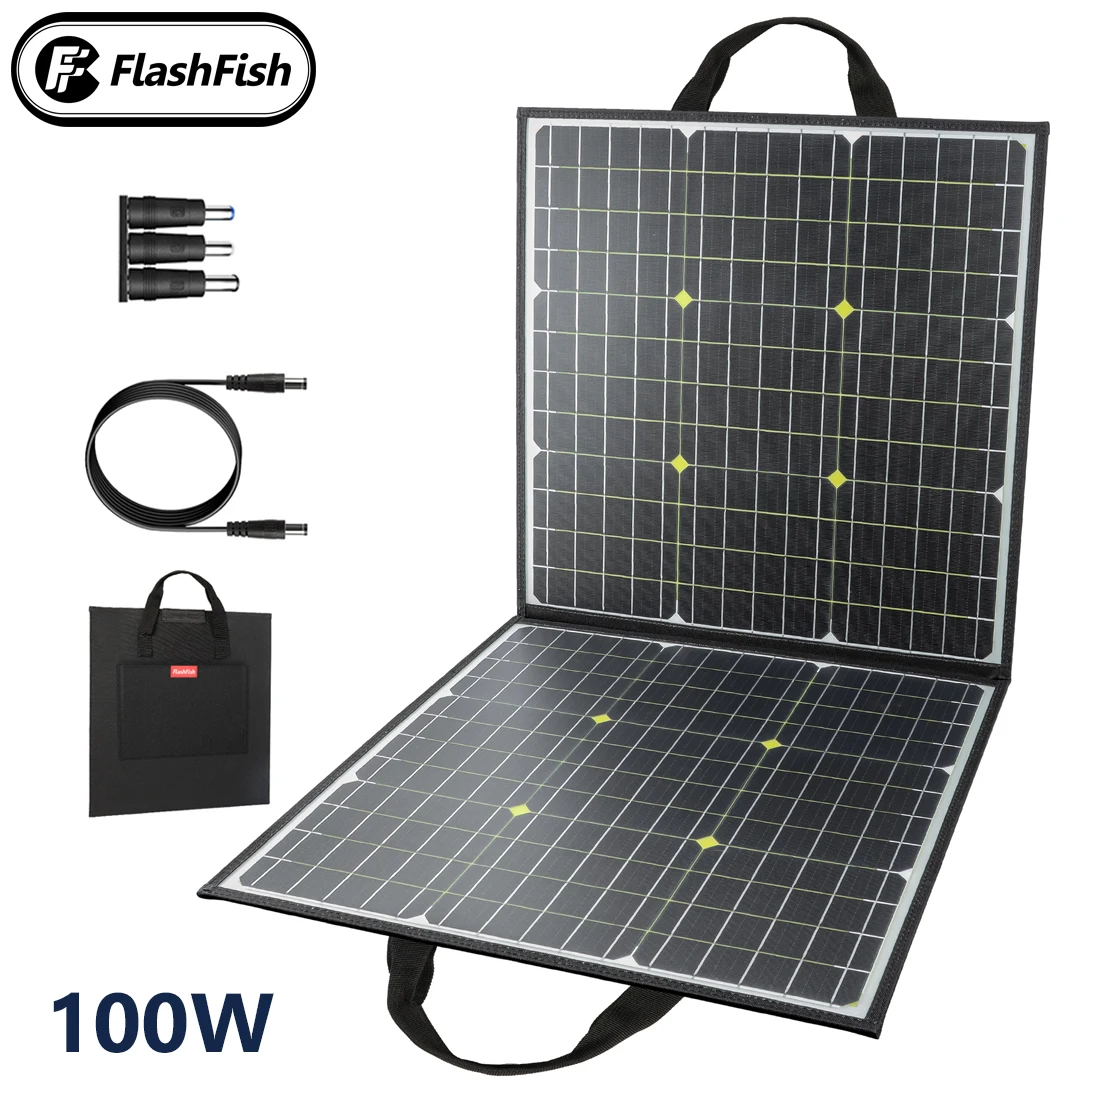 

Flashfish Portable Solar Panel 100W 18V Foldable Solar Cells 5V Dual USB Battery Charger Outdoor Power Supply Camping Travel